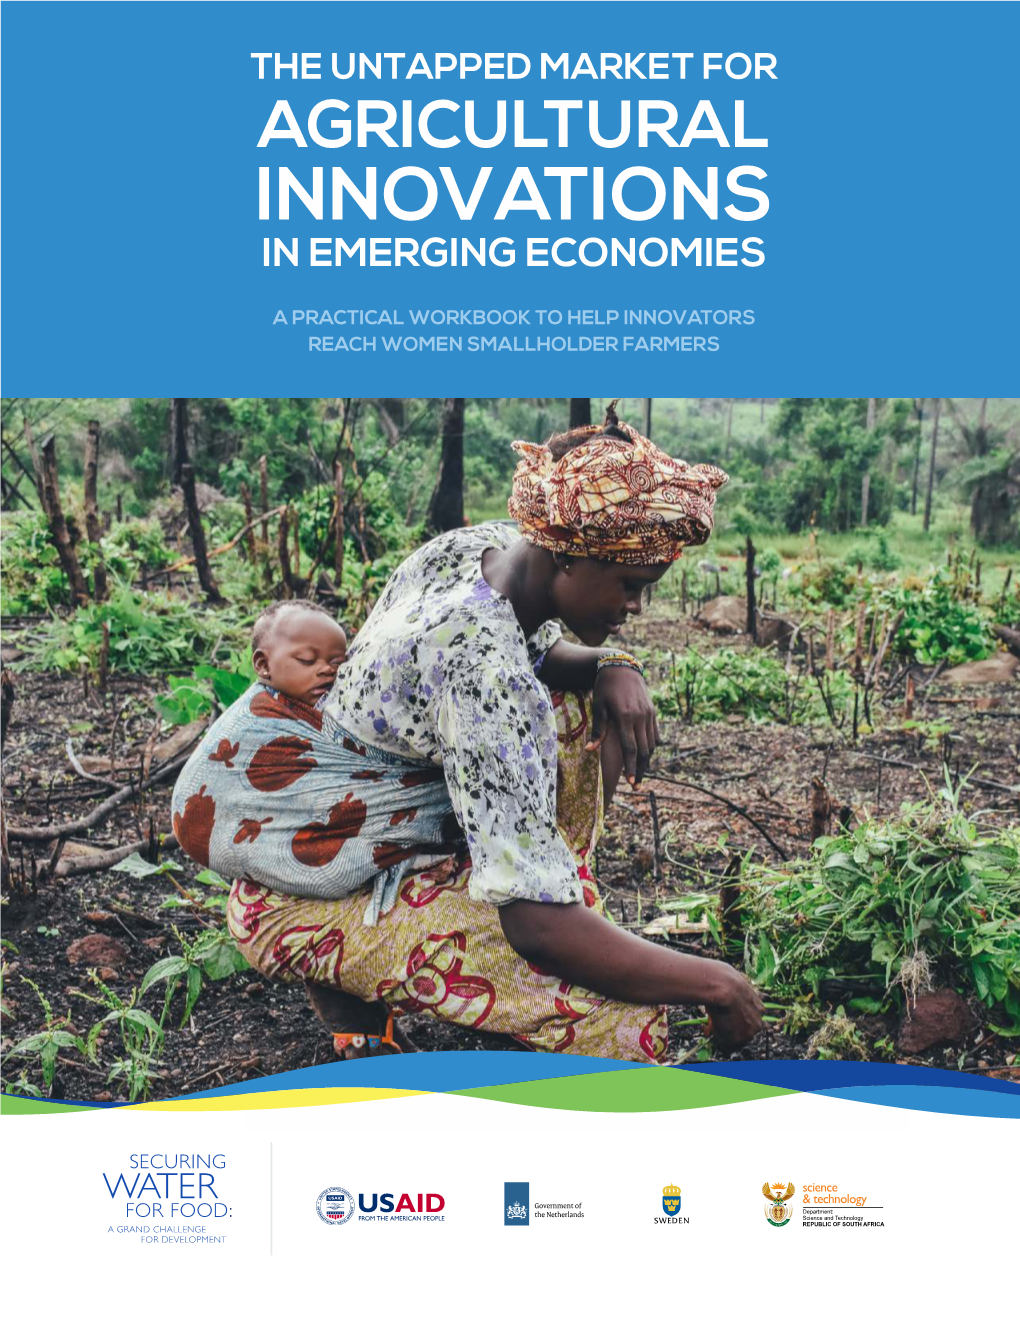 The Untapped Market for Agricultural Innovations in Emerging Economies